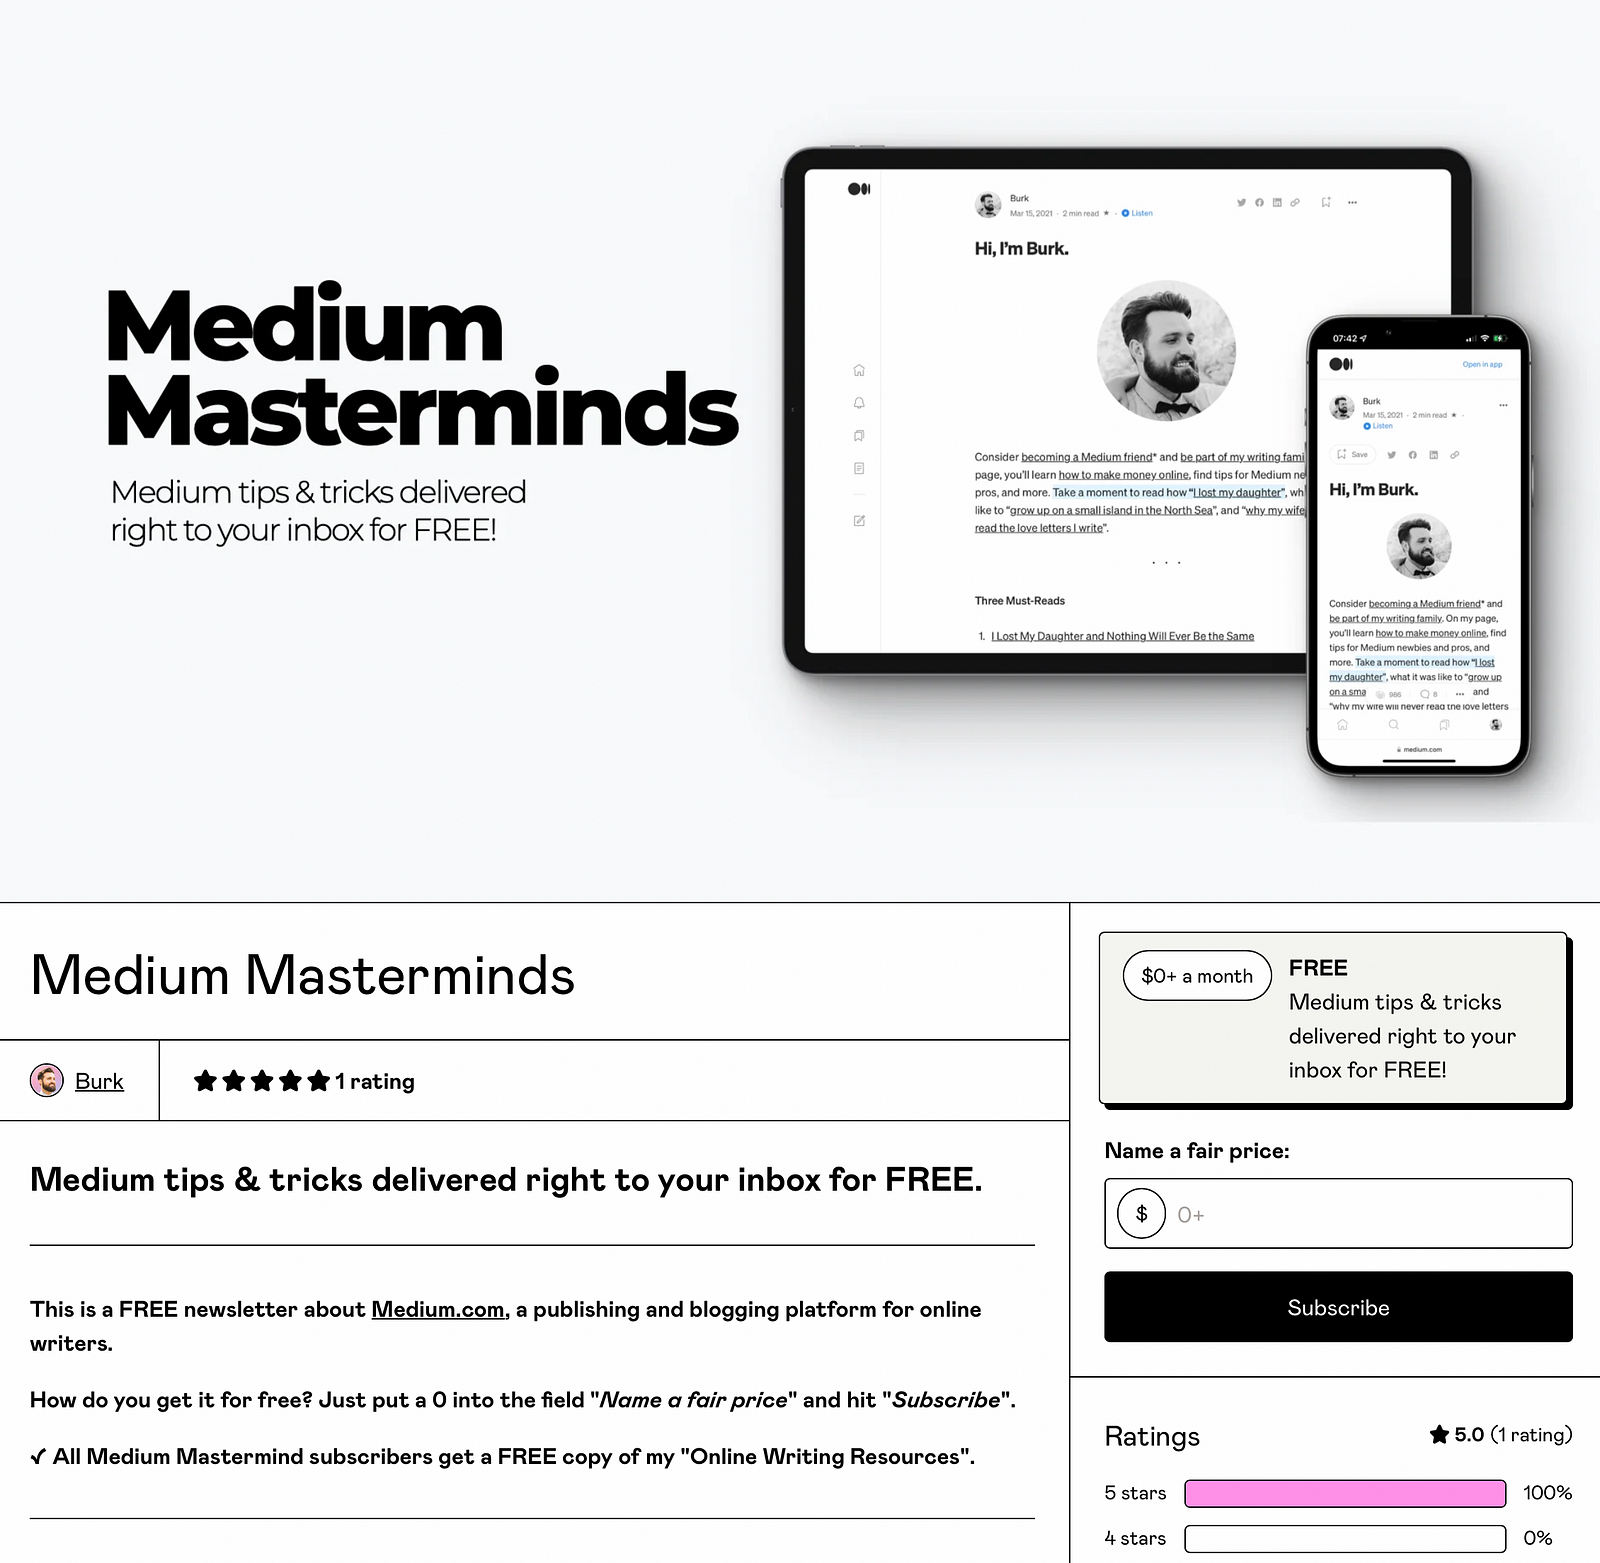 Screenshot of “Medium Masterminds” webpage, take by the author